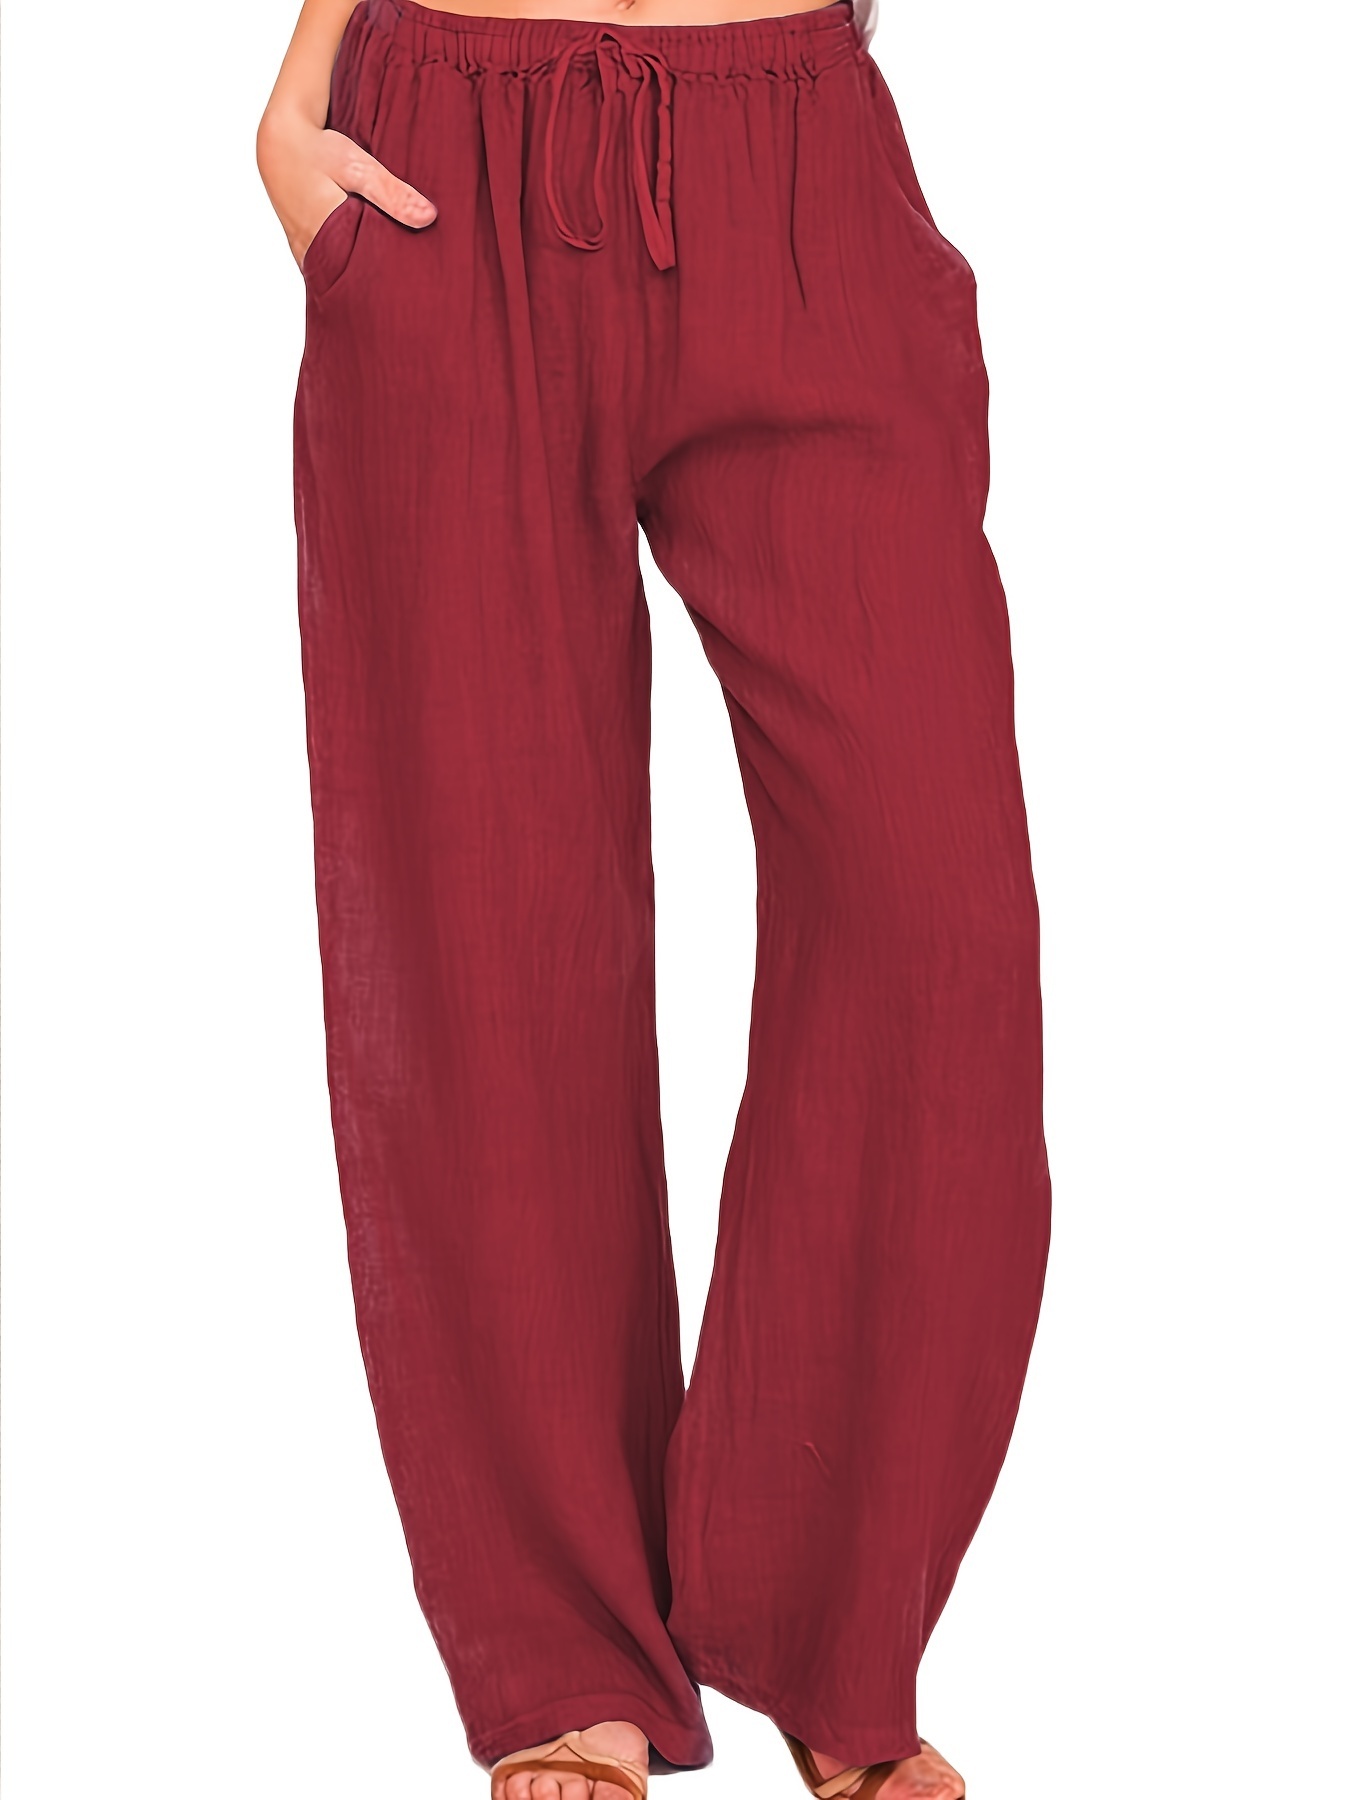 Women's Plus Size Solid Color Straight Drawstring Pants with Pockets